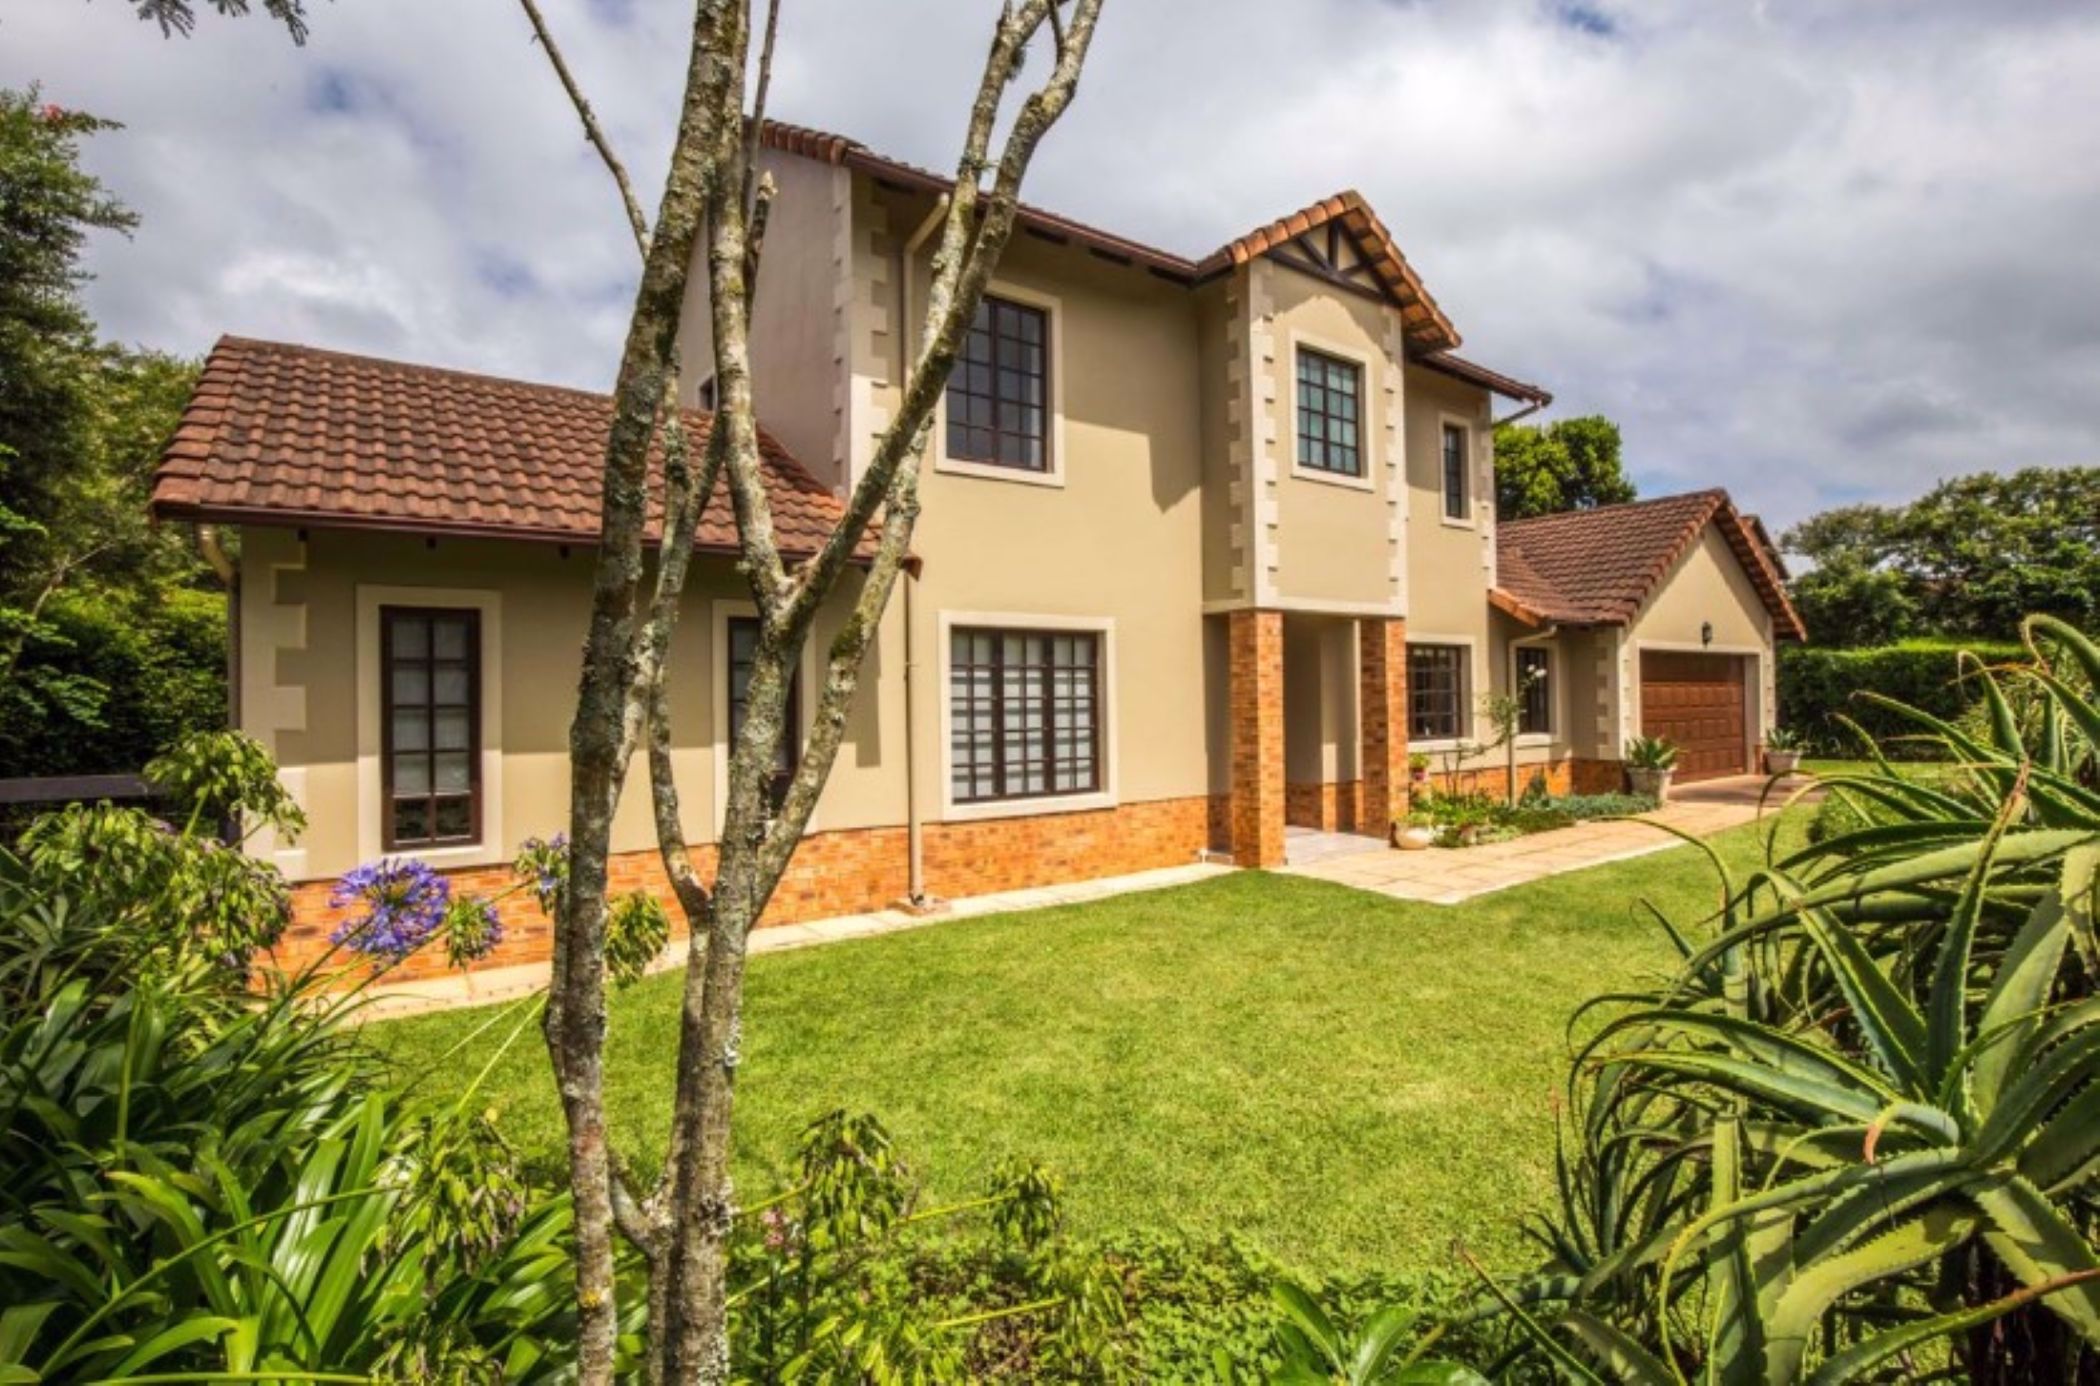 3 bedroom house for sale in Clifton Hill Estate